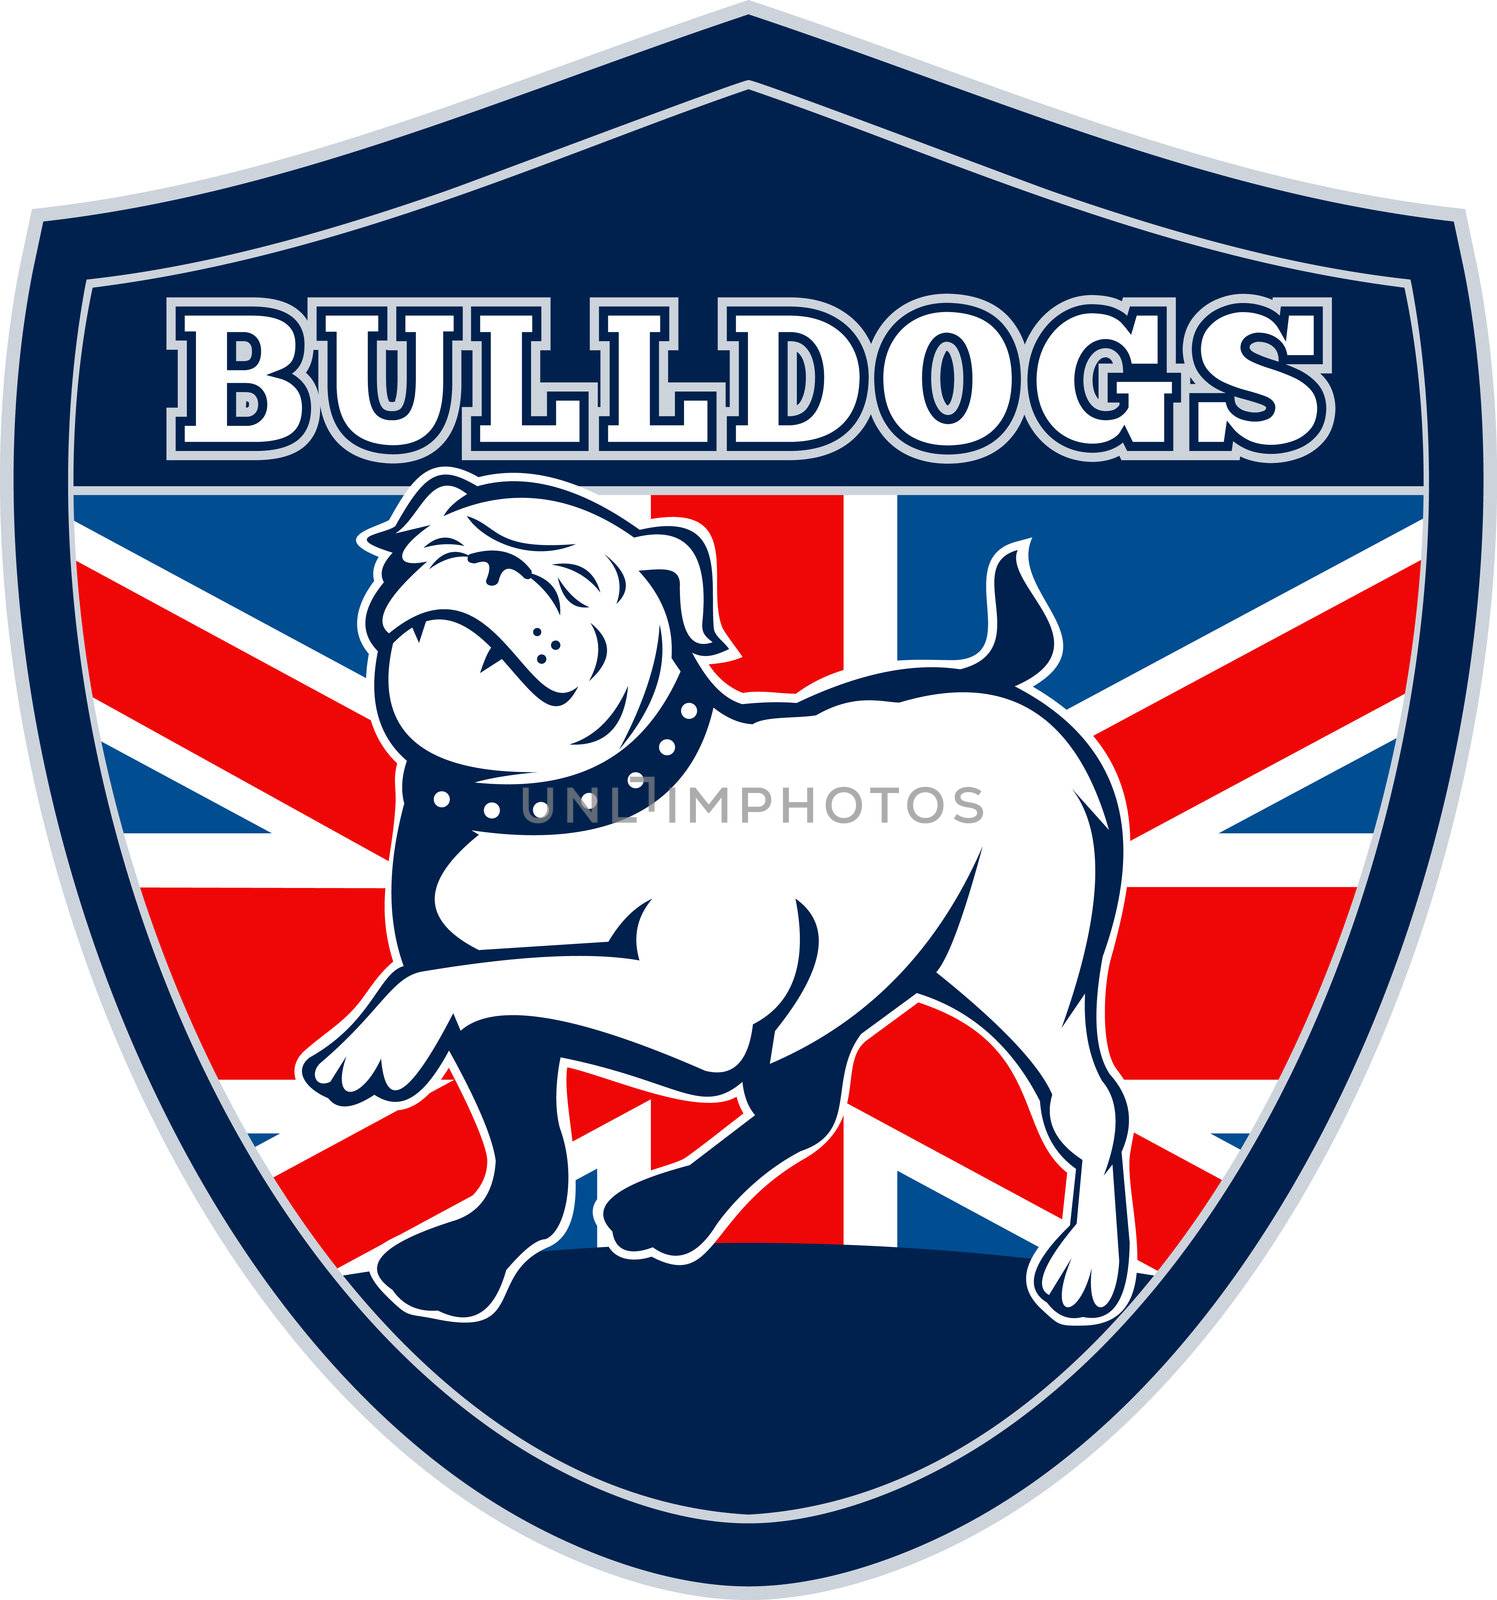 illustration of a Proud English bulldog marching with Great Britain or British flag in background set inside a shield with words "bulldogs" suitable for any sports team mascot